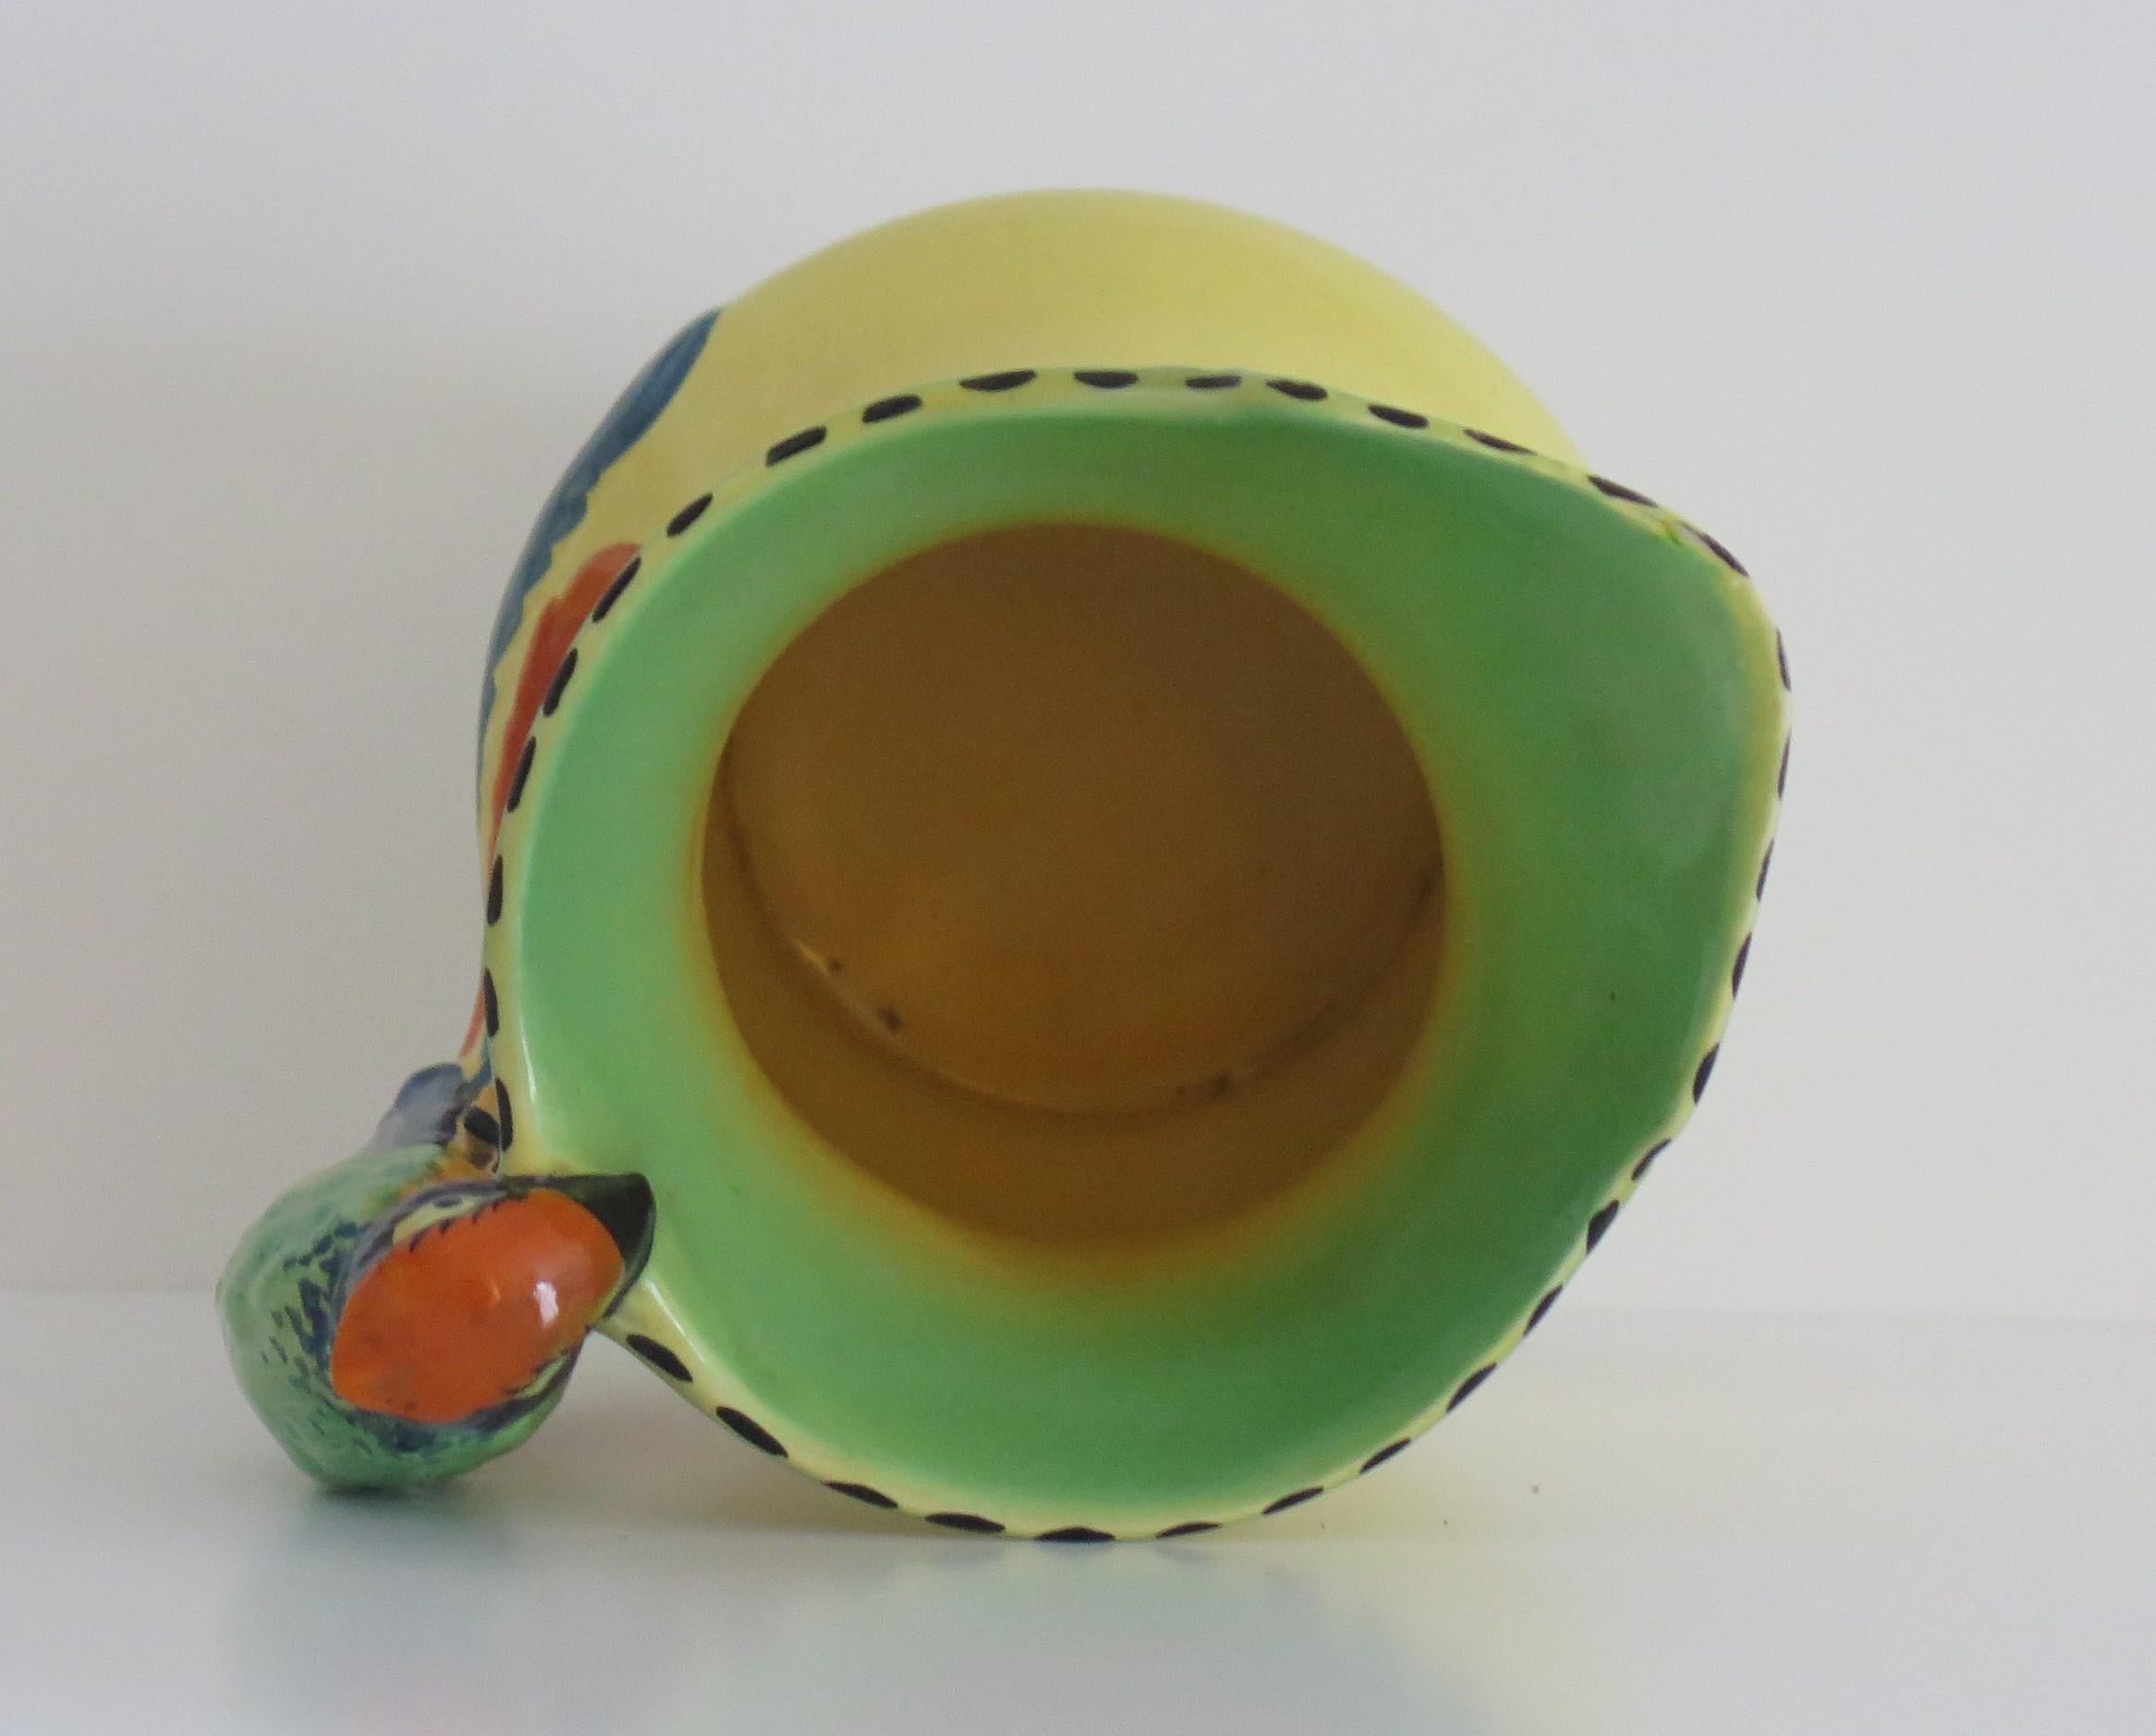 Art Deco Burleigh Ware Pottery Jug or Pitcher Parrot Handle Hand-Painted, 1930s For Sale 1